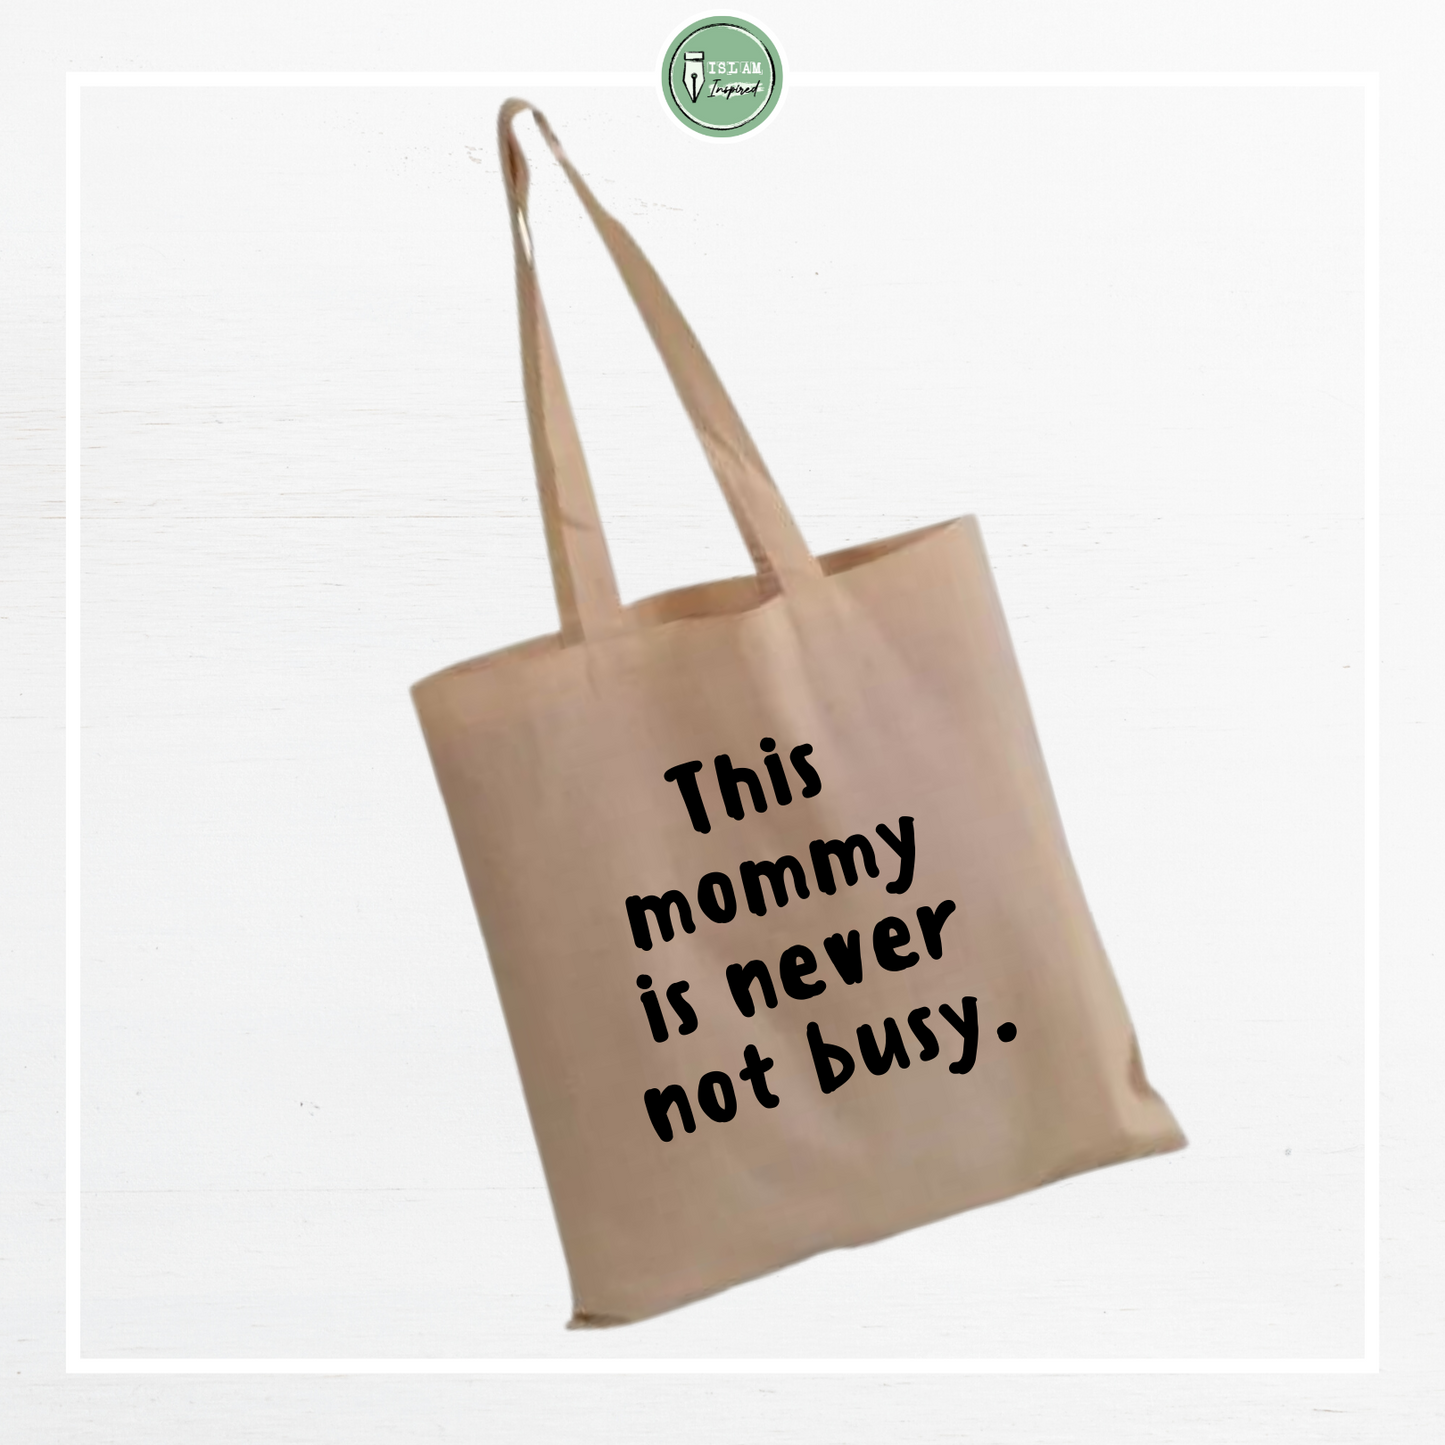 Totebag 'This mommy is never not busy'